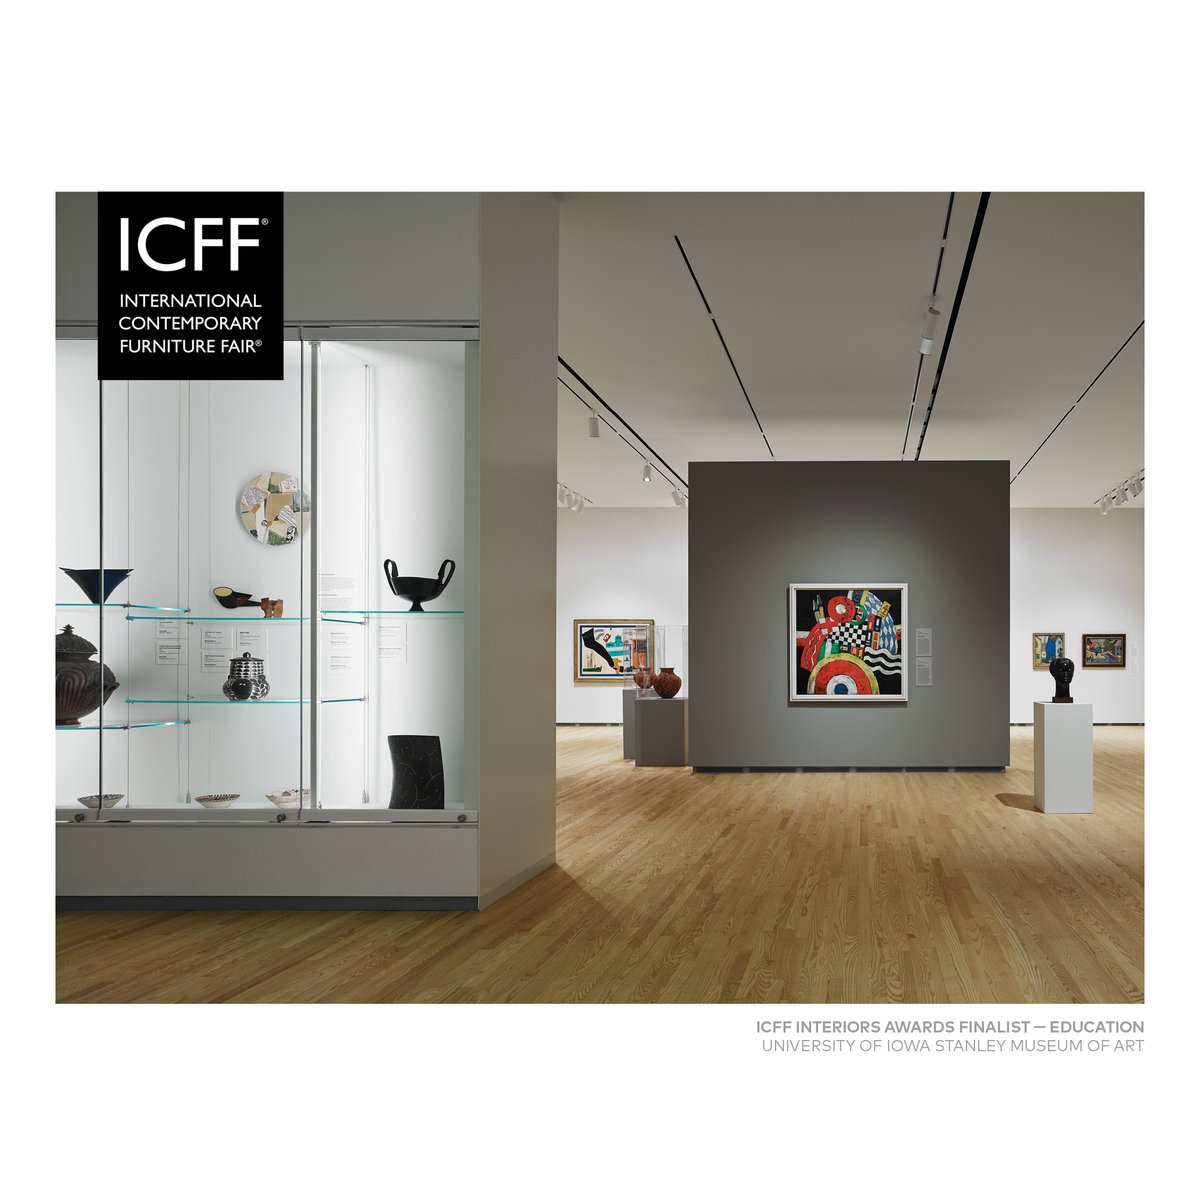 The University of Iowa Stanley Museum of Art was announced as a finalist for the 2023 @ICFF Interiors Award in the Education category. Winners will be honored at the awards dinner being held in New York on May 21. Read more: icff.com/stories/2023-i… #bnim